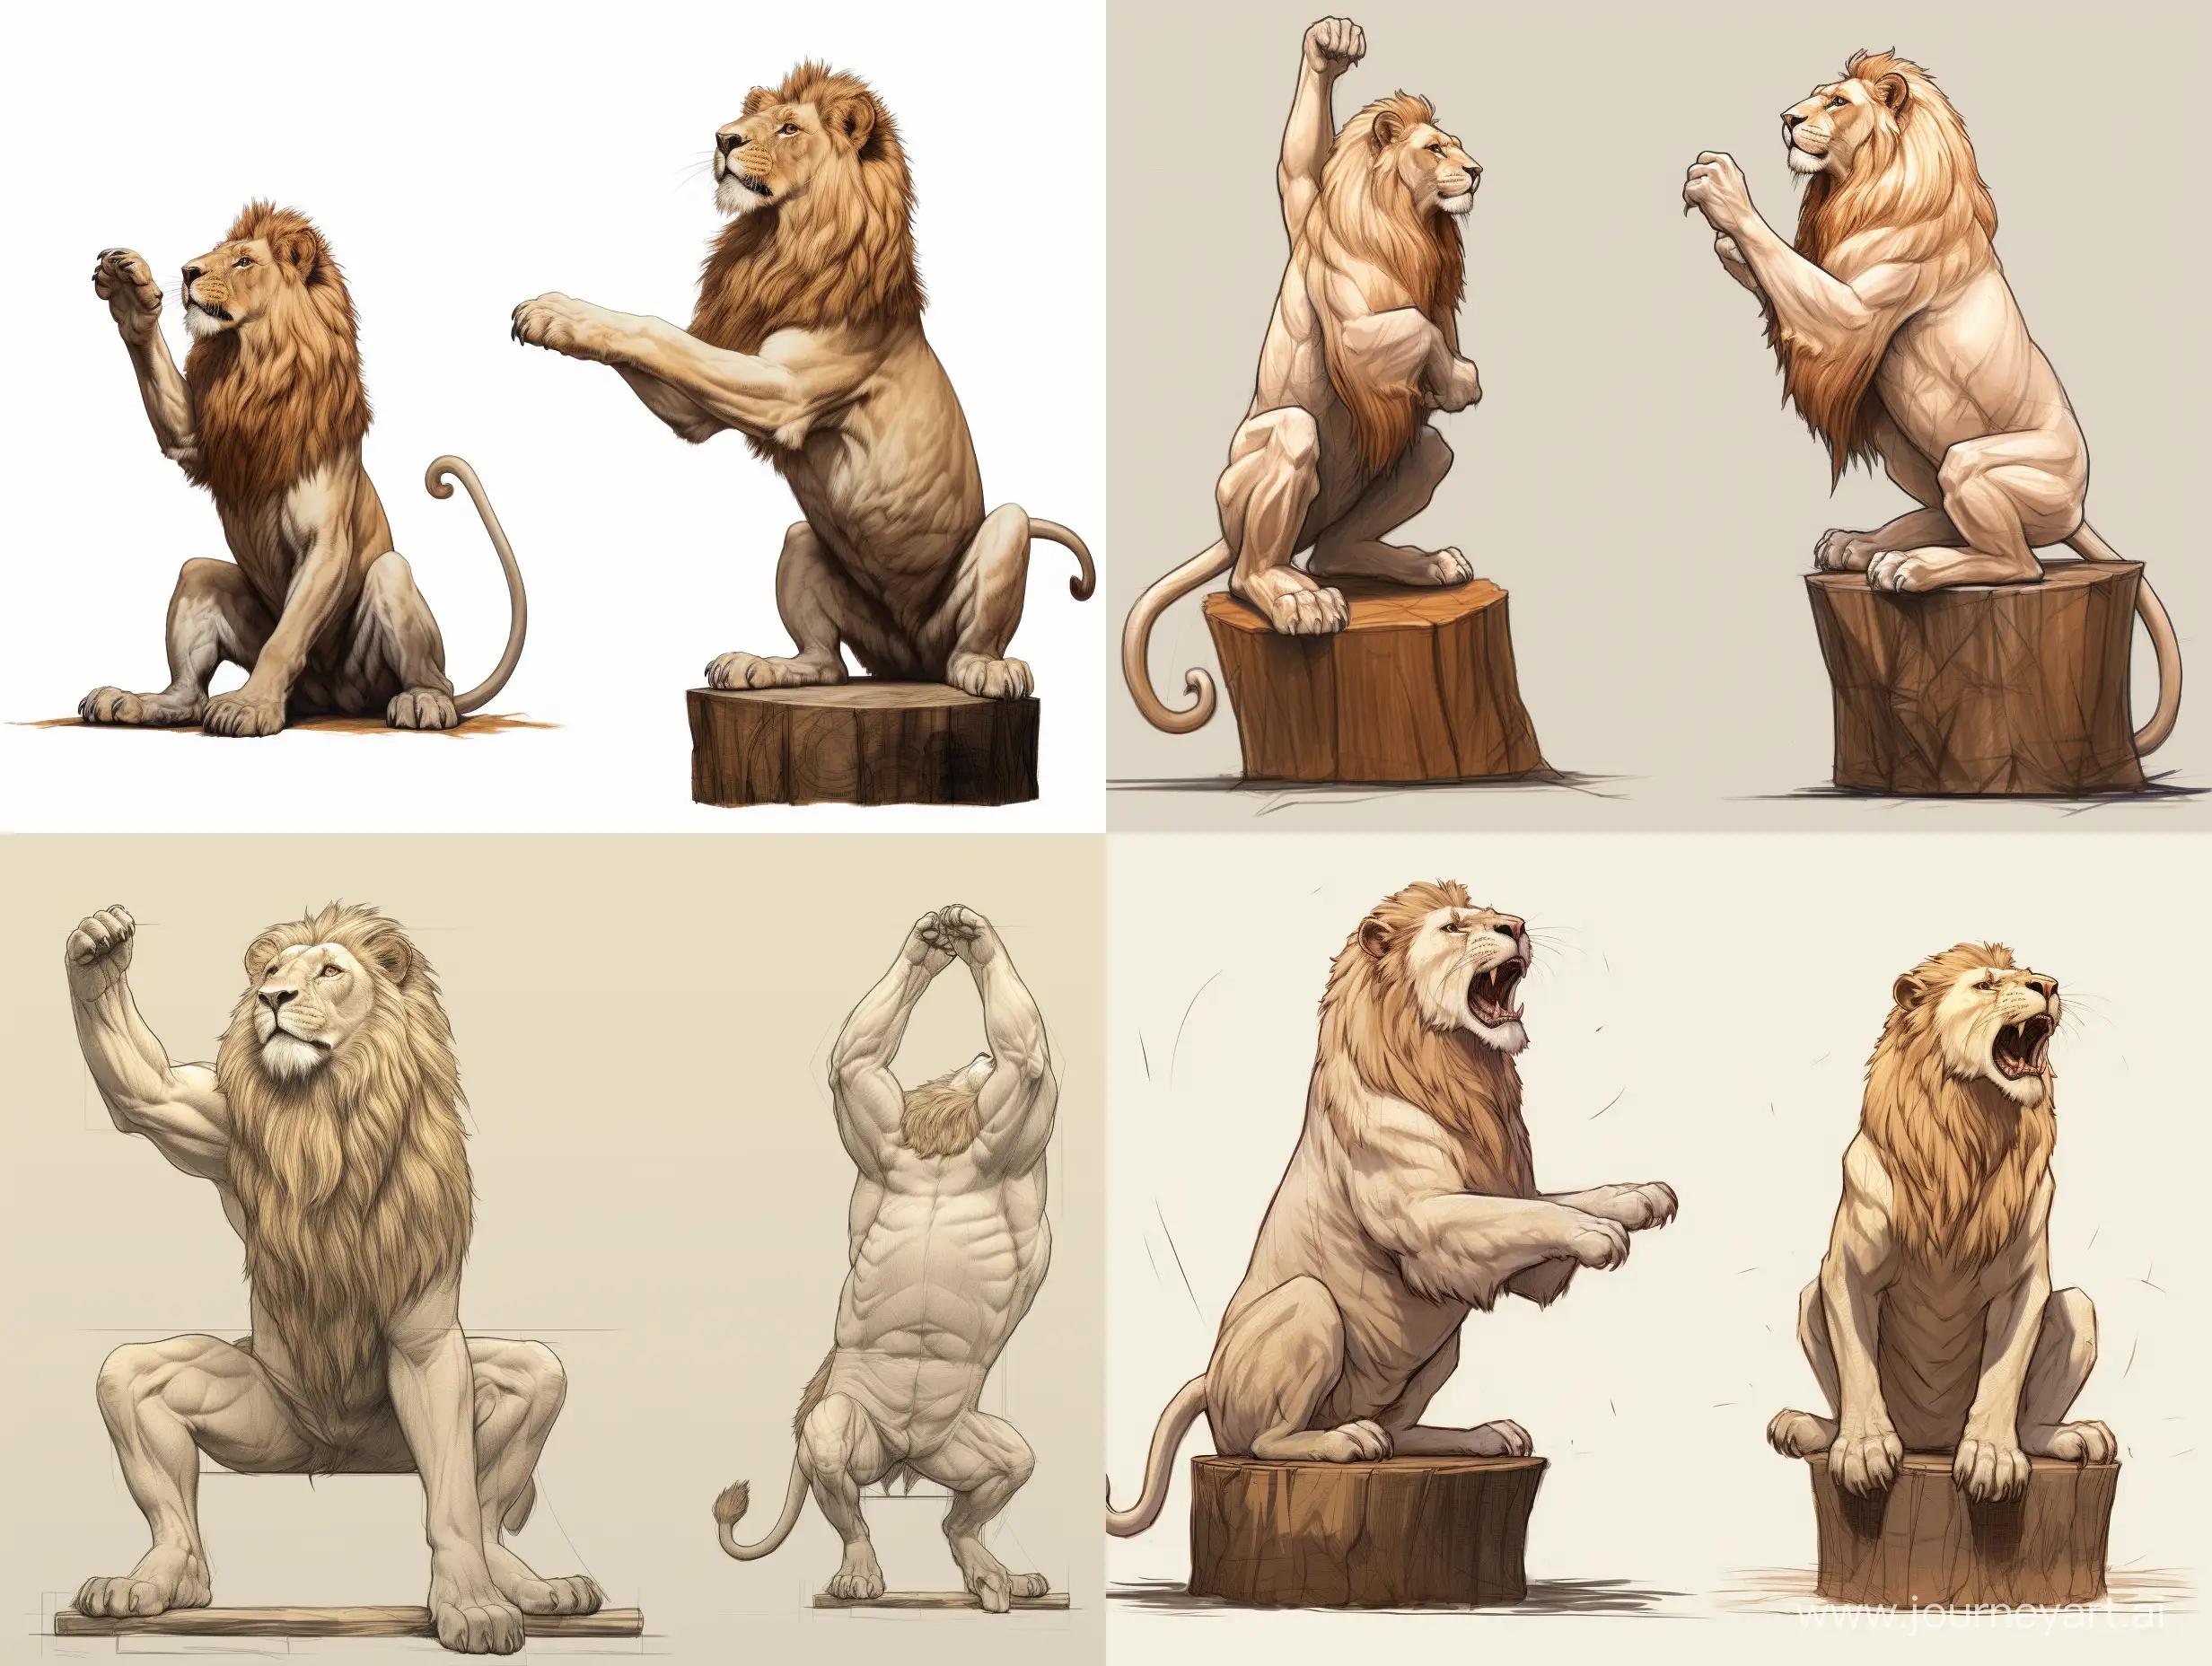 Majestic-Lion-Wood-Carving-Sculpture-Dynamic-Greeting-Pose-on-Wooden-Cube